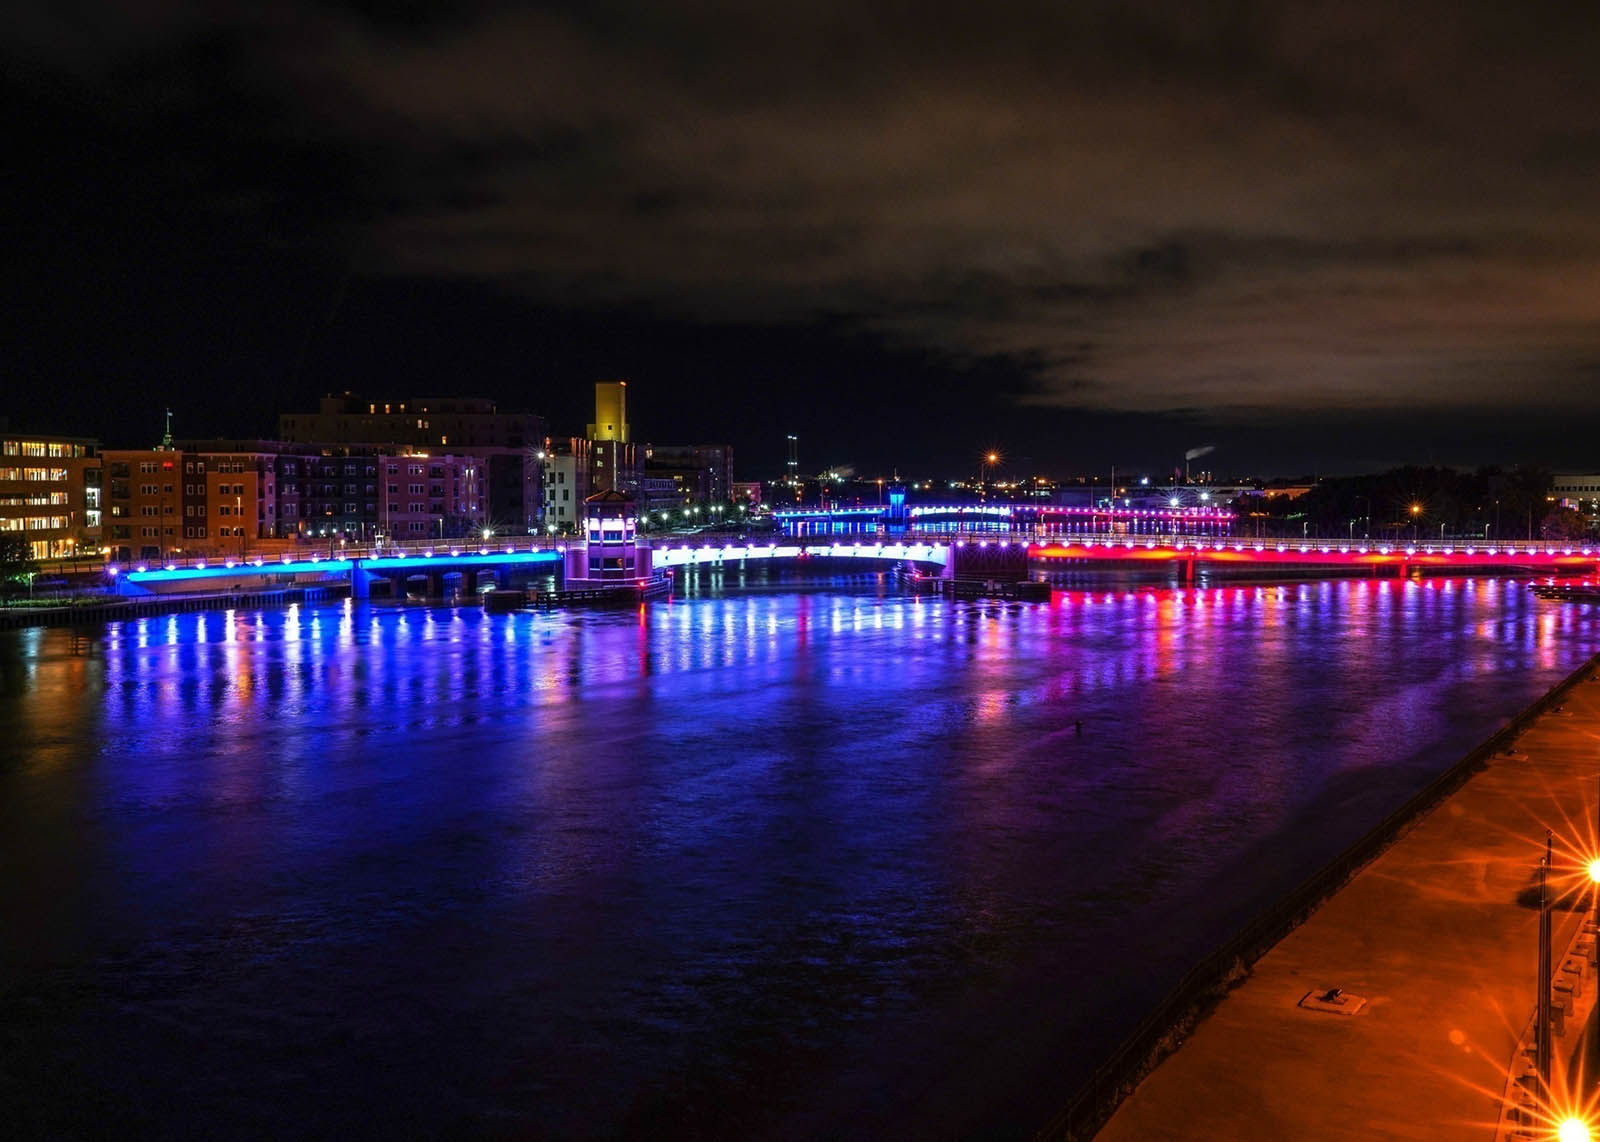 Red, white, and blue LED lighting patterns on the Ray Nitschke (Main St.) and Walnut Street bridges in Green Bay, WI